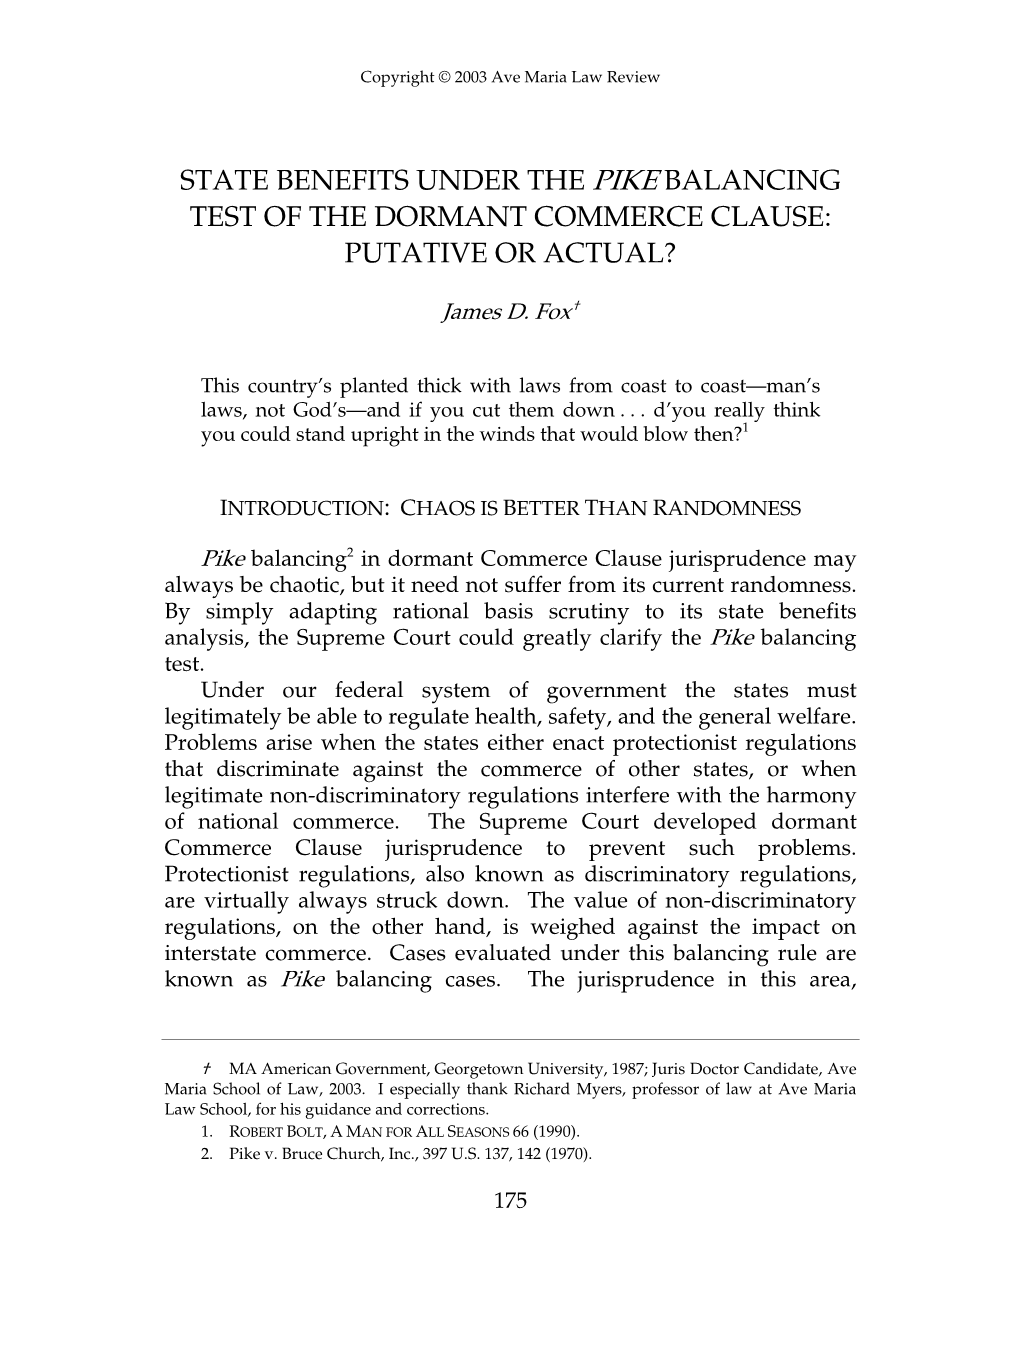 State Benefits Under the Pike Balancing Test of the Dormant Commerce Clause: Putative Or Actual?